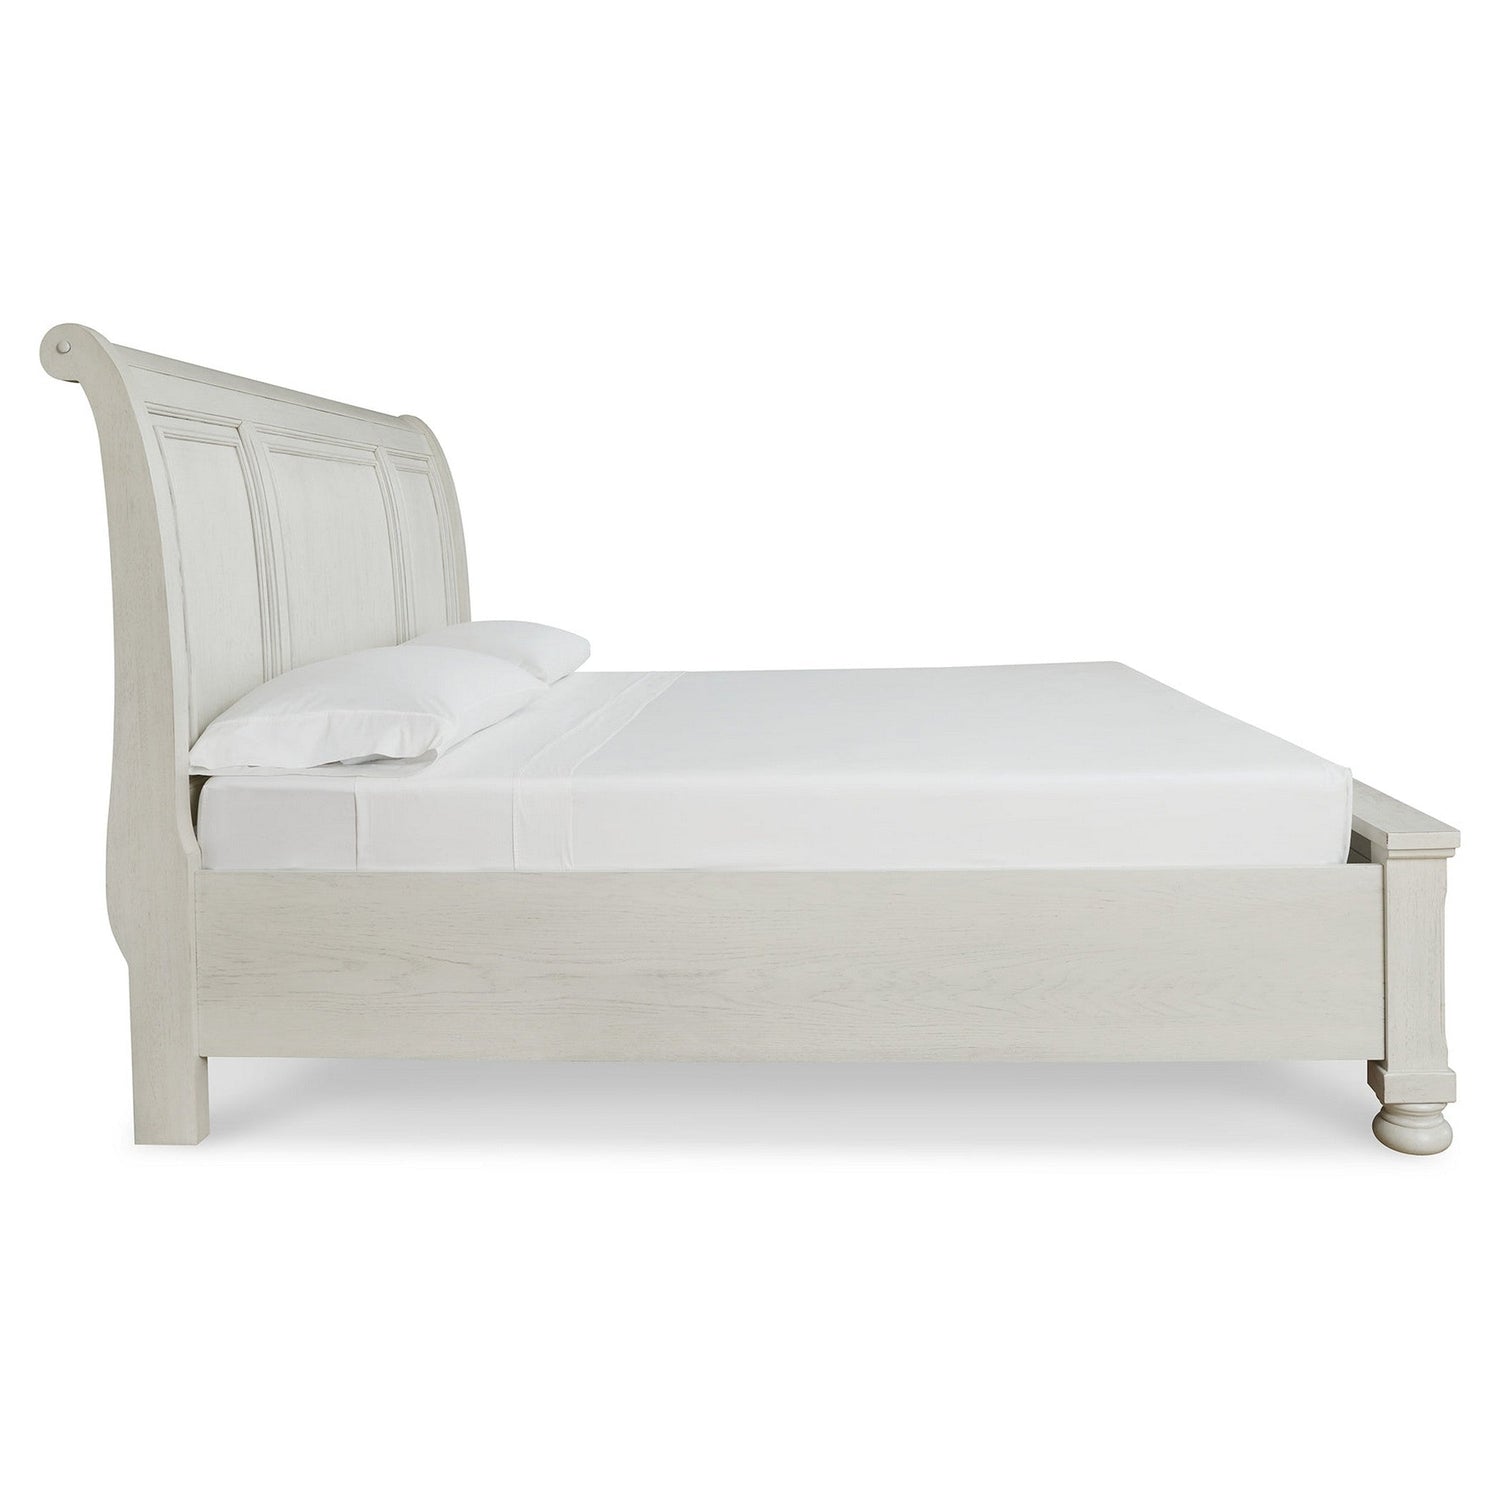 Robbinsdale Sleigh Bed with Storage